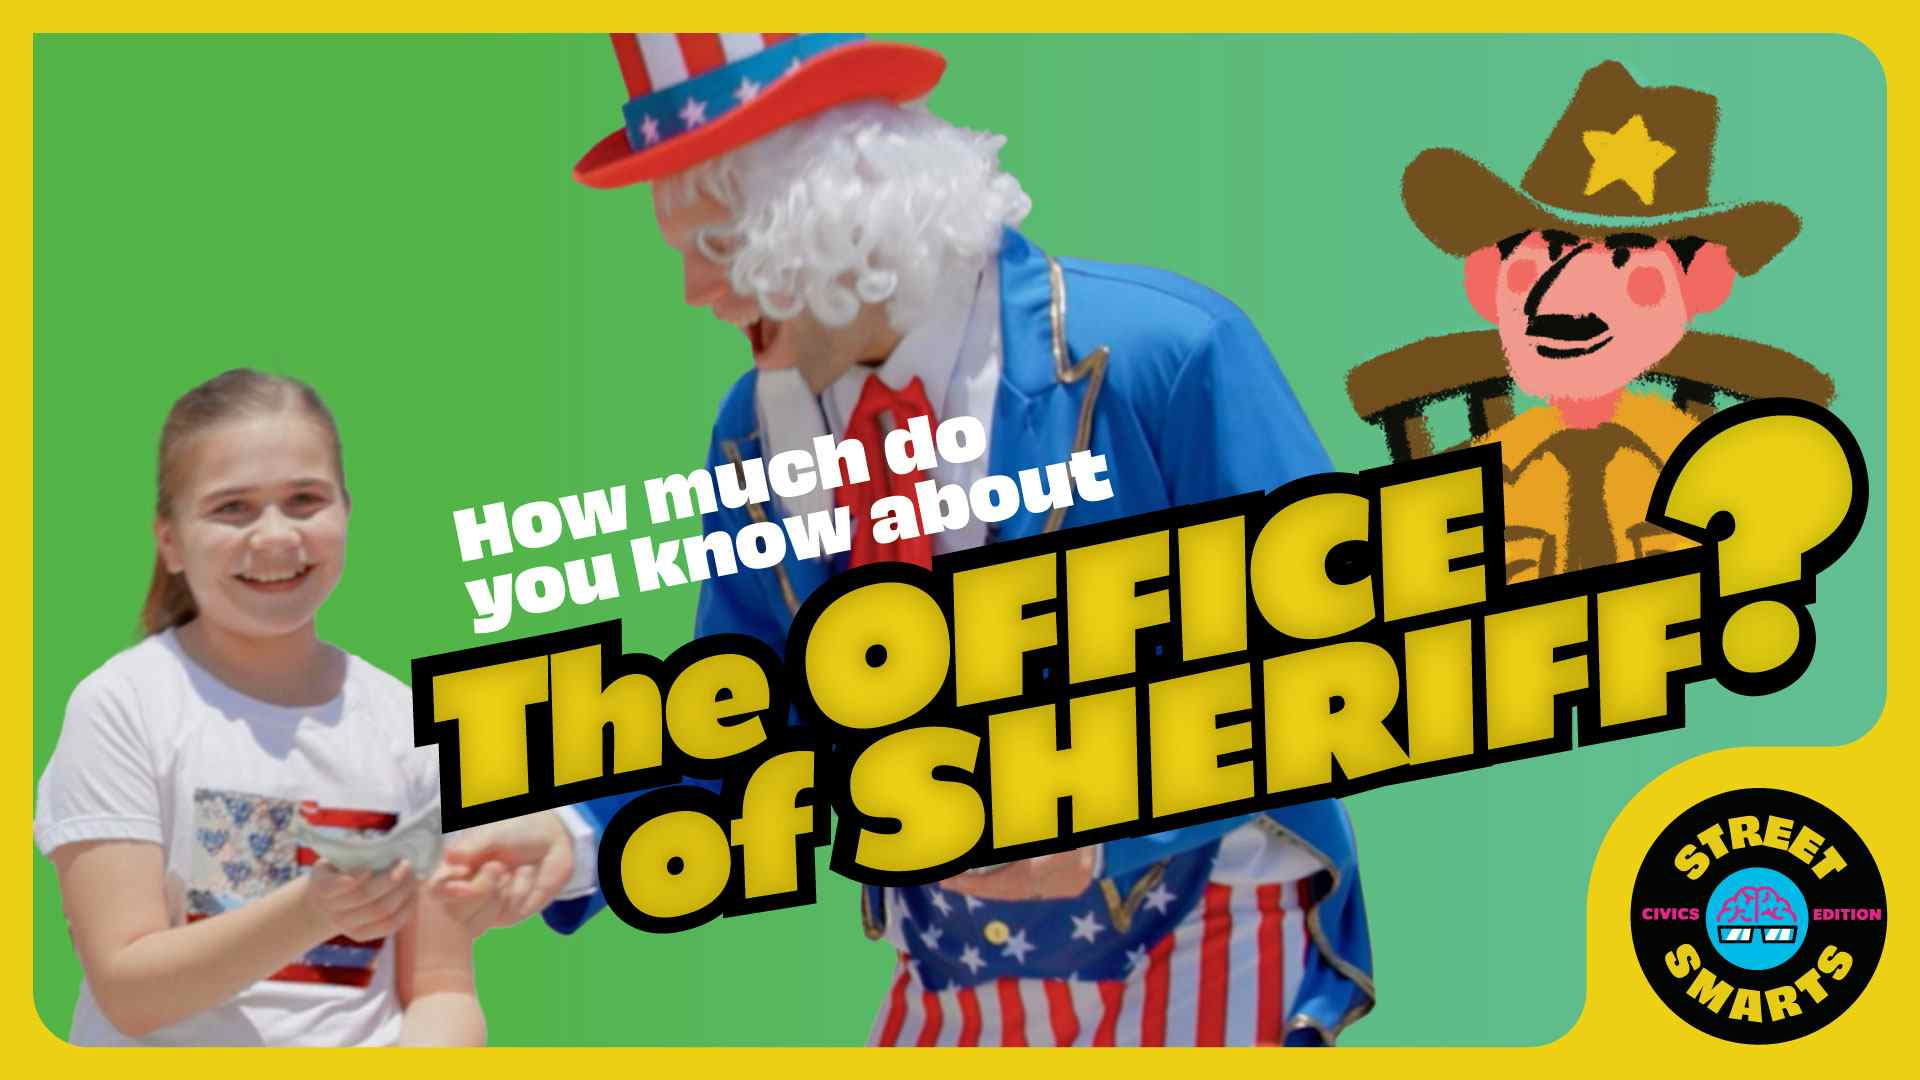 Street Smarts: The Office of Sheriff